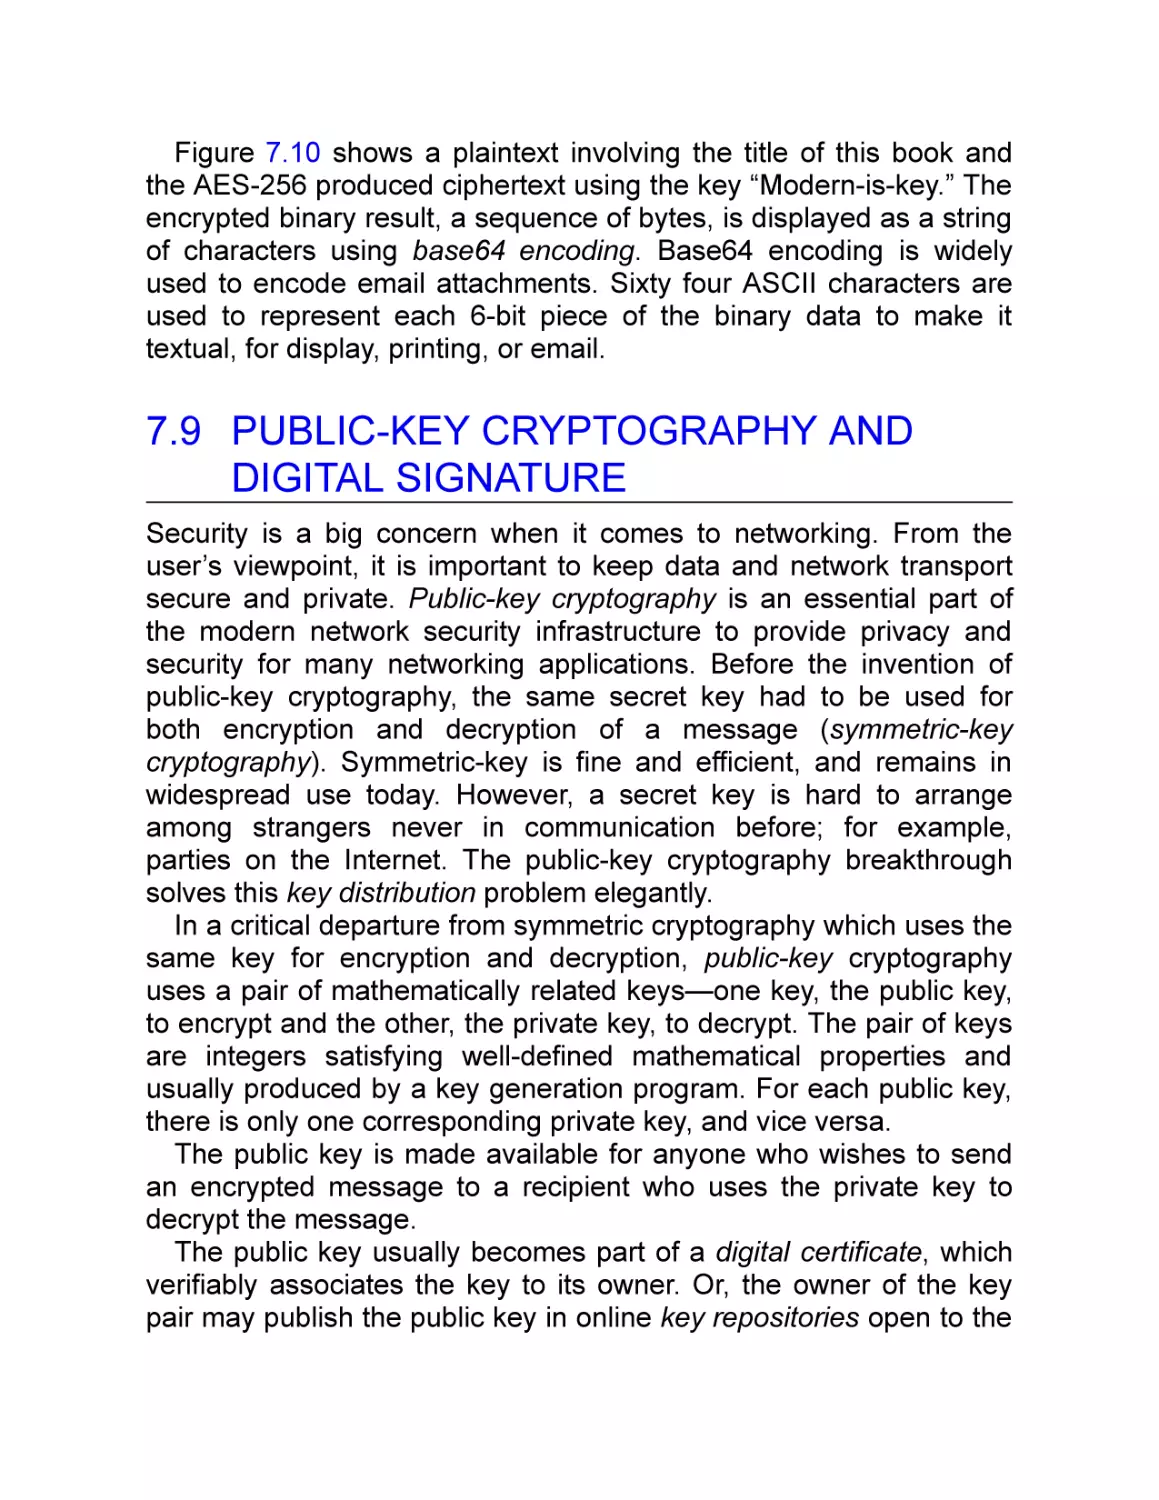 7.9 Public-Key Cryptography and Digital Signature